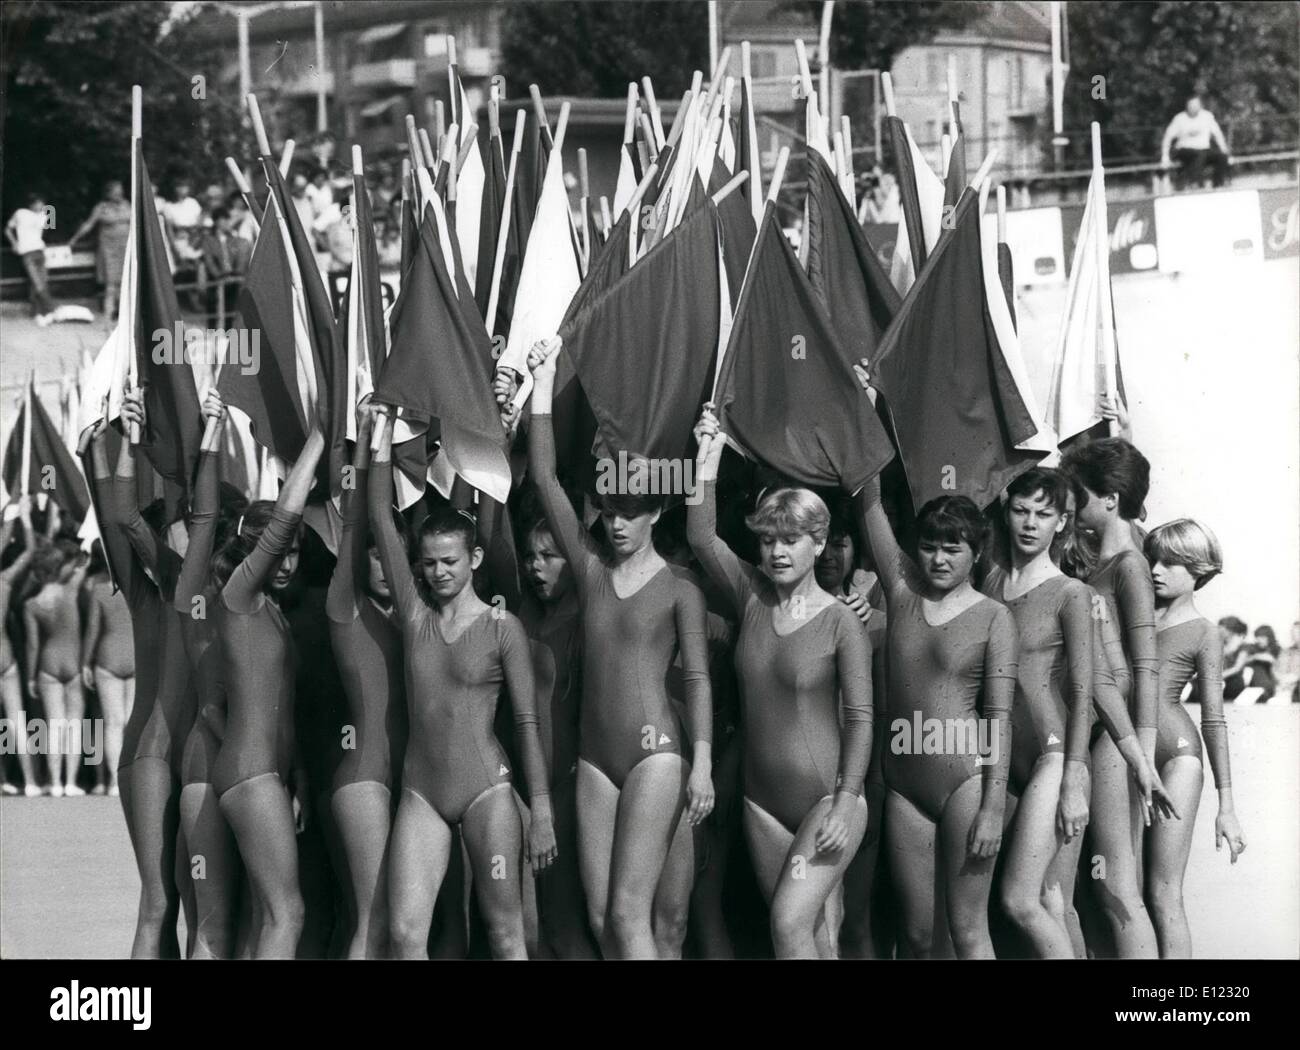 Jul. 07, 1982 - Aren't they beautiful..: These Dutch girls performing with their bodies and silk shawls- one of the many shows at Gymnestrada held these days in Zurich, Switz. Stock Photo